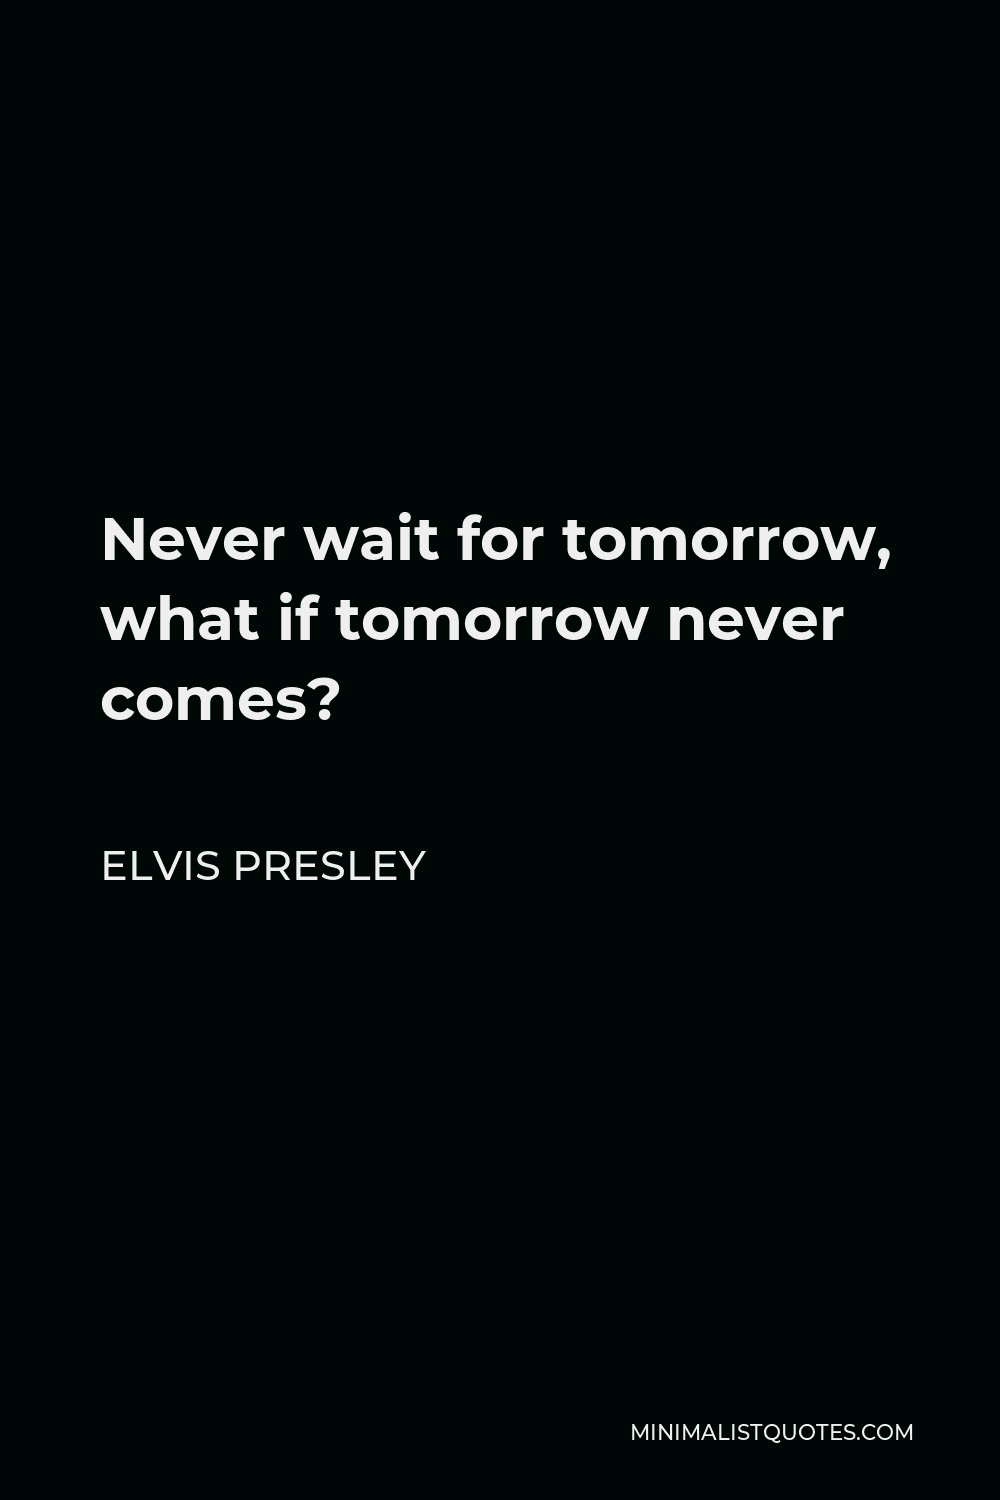 Elvis Presley Quote Never Wait For Tomorrow What If Tomorrow Never Comes